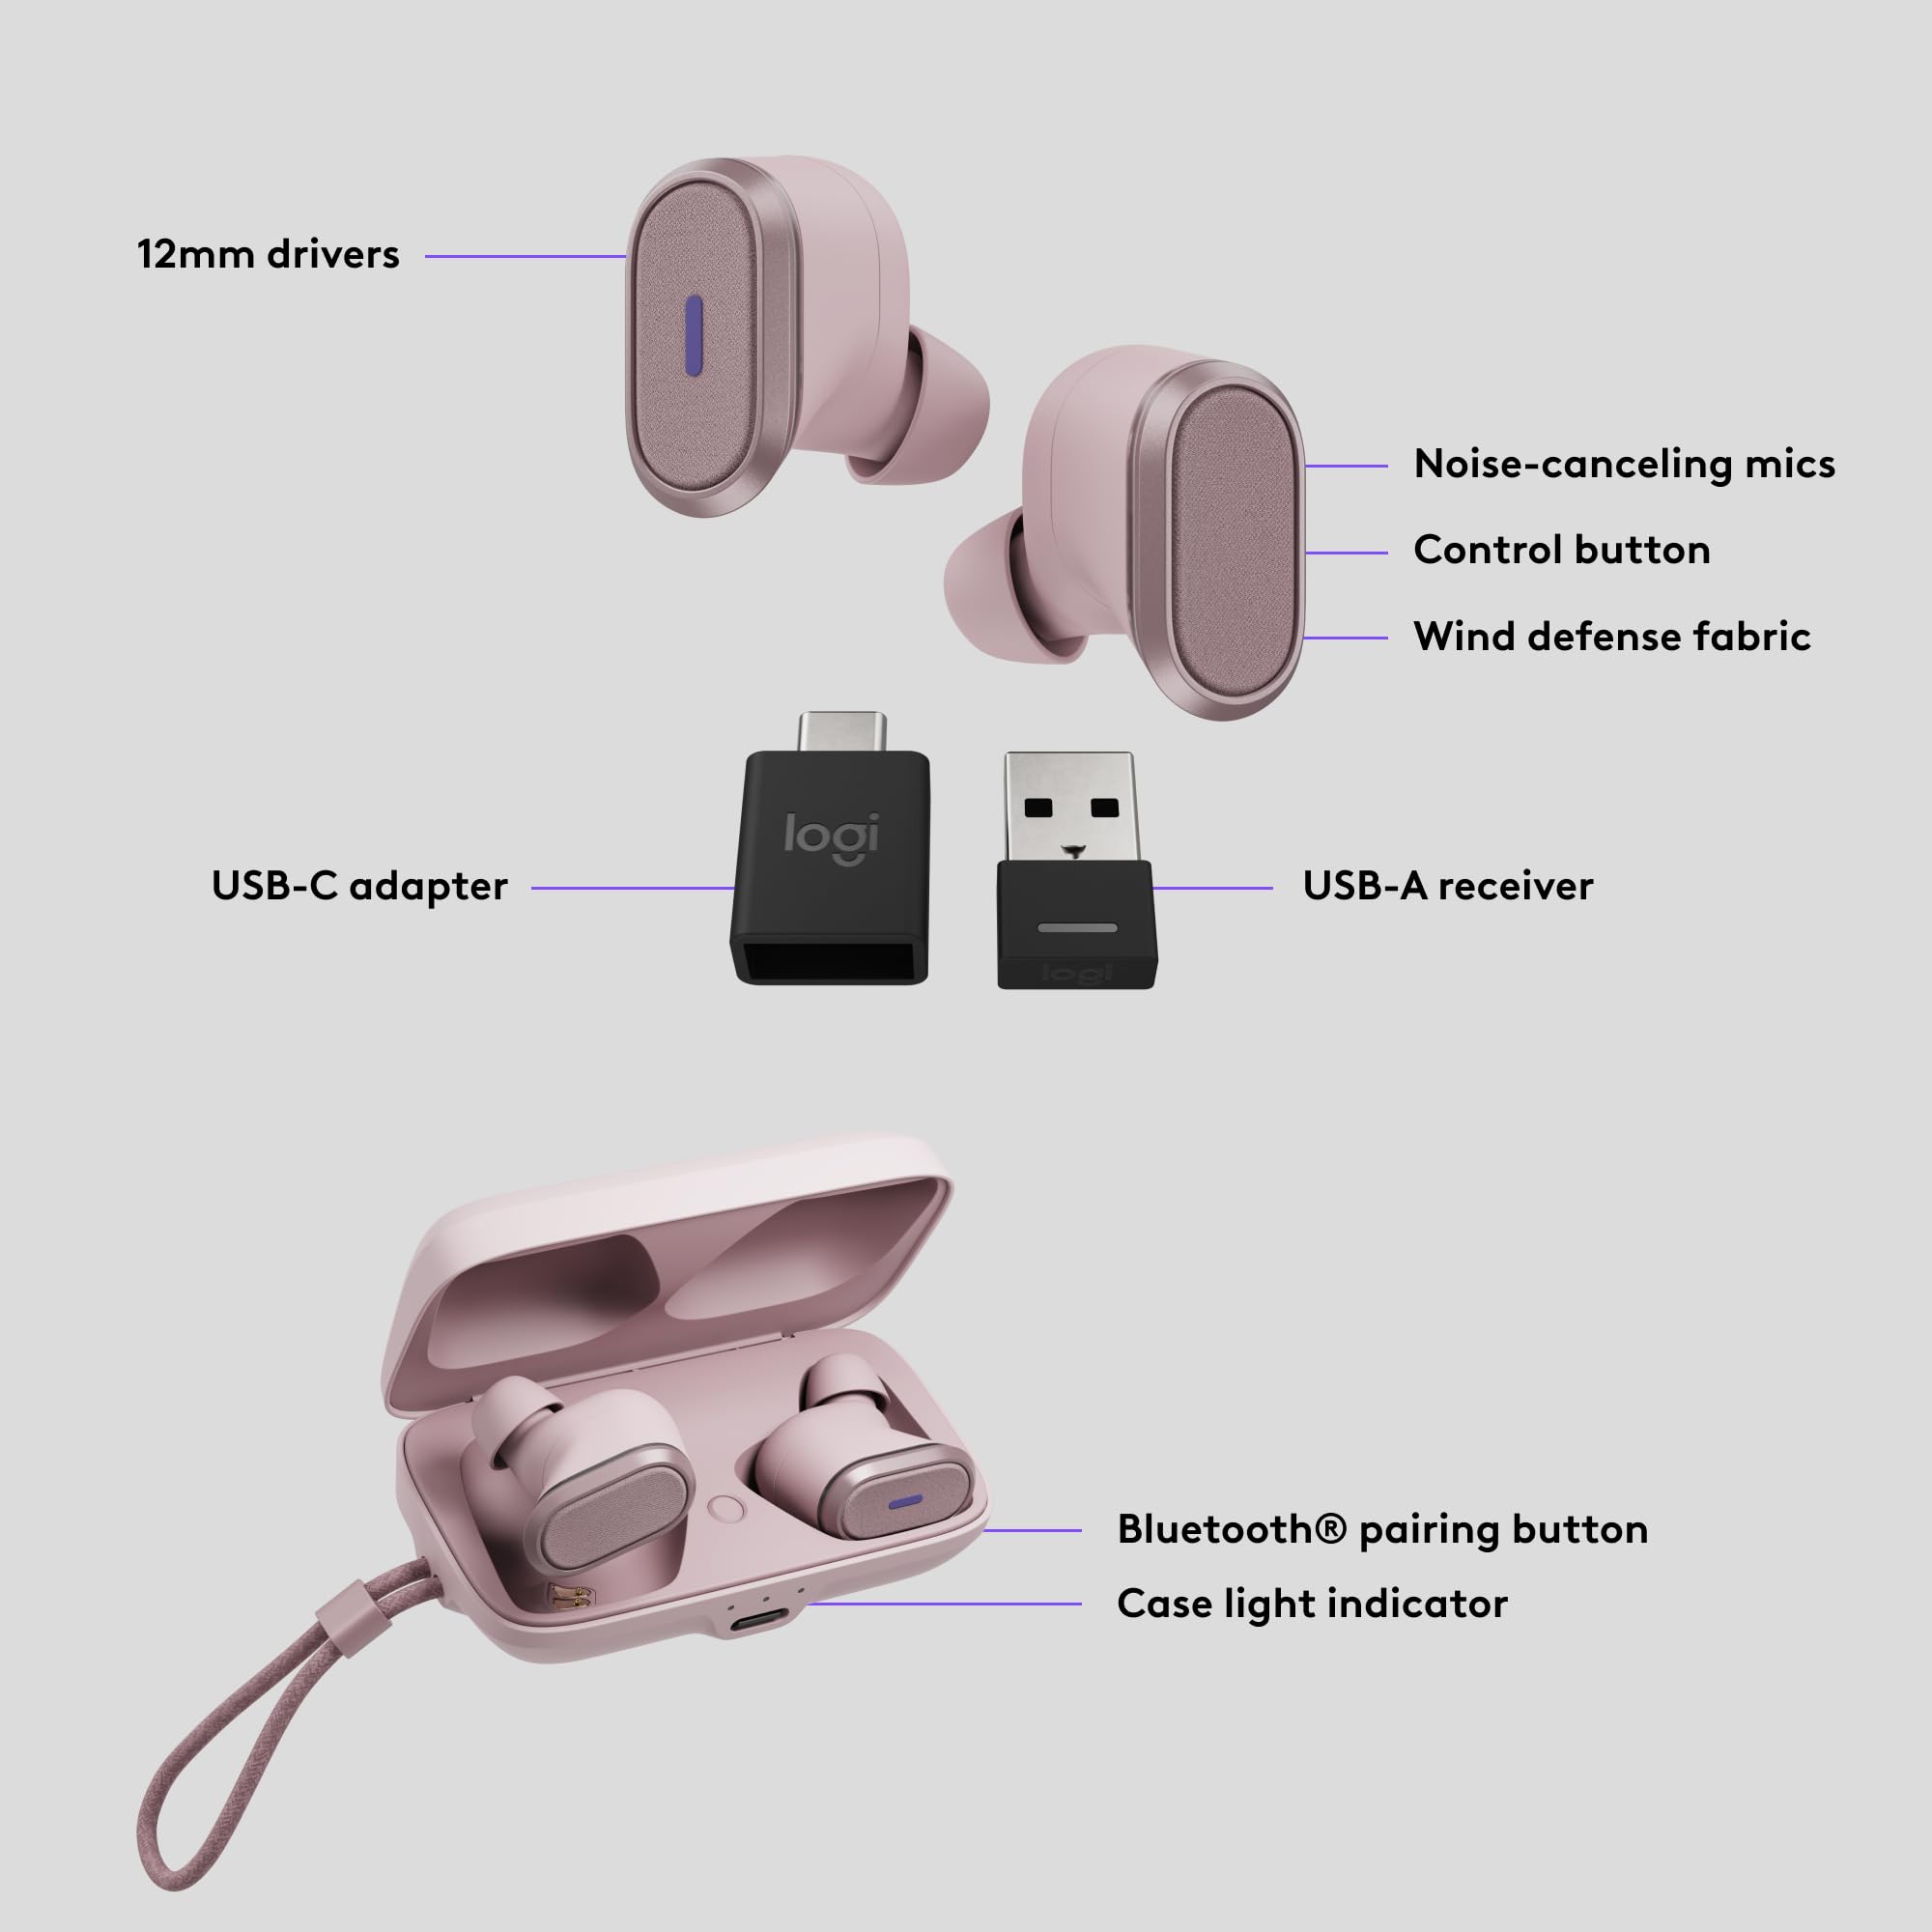 Logitech Zone True Wireless Bluetooth Noise Canceling Earbuds with Microphone, Hybrid ANC, Transparency Mode, Certified for Microsoft Teams, Zoom, Google Meet, Google Voice - Rose